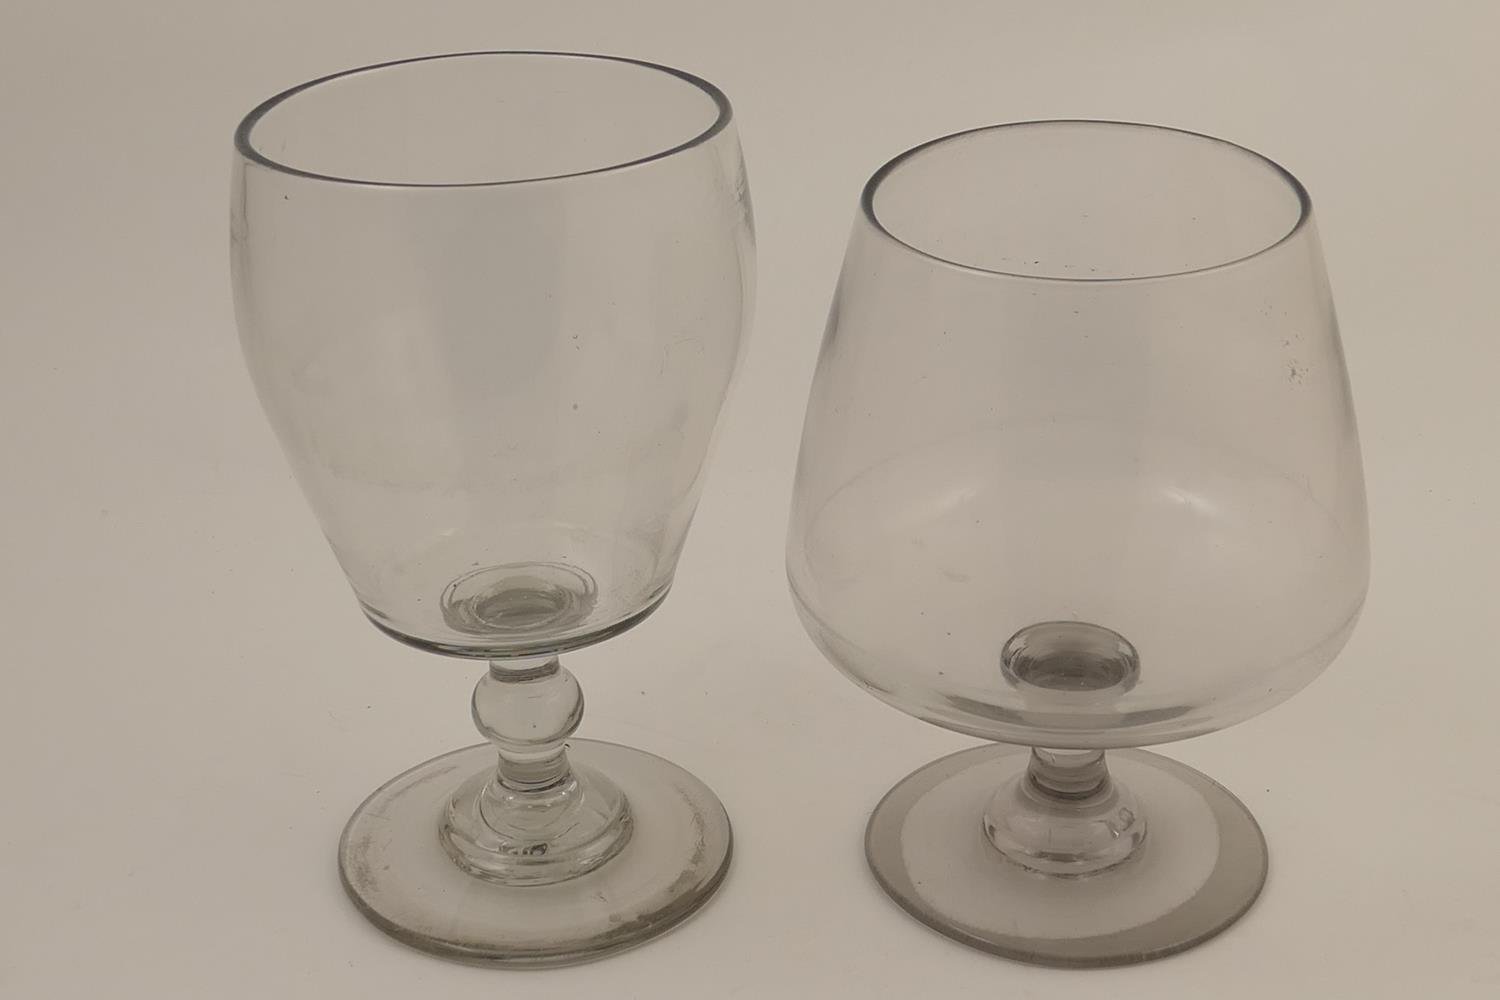 Large blown glass goblet, mid 19th Century, the deep slight baluster bowl over a single solid